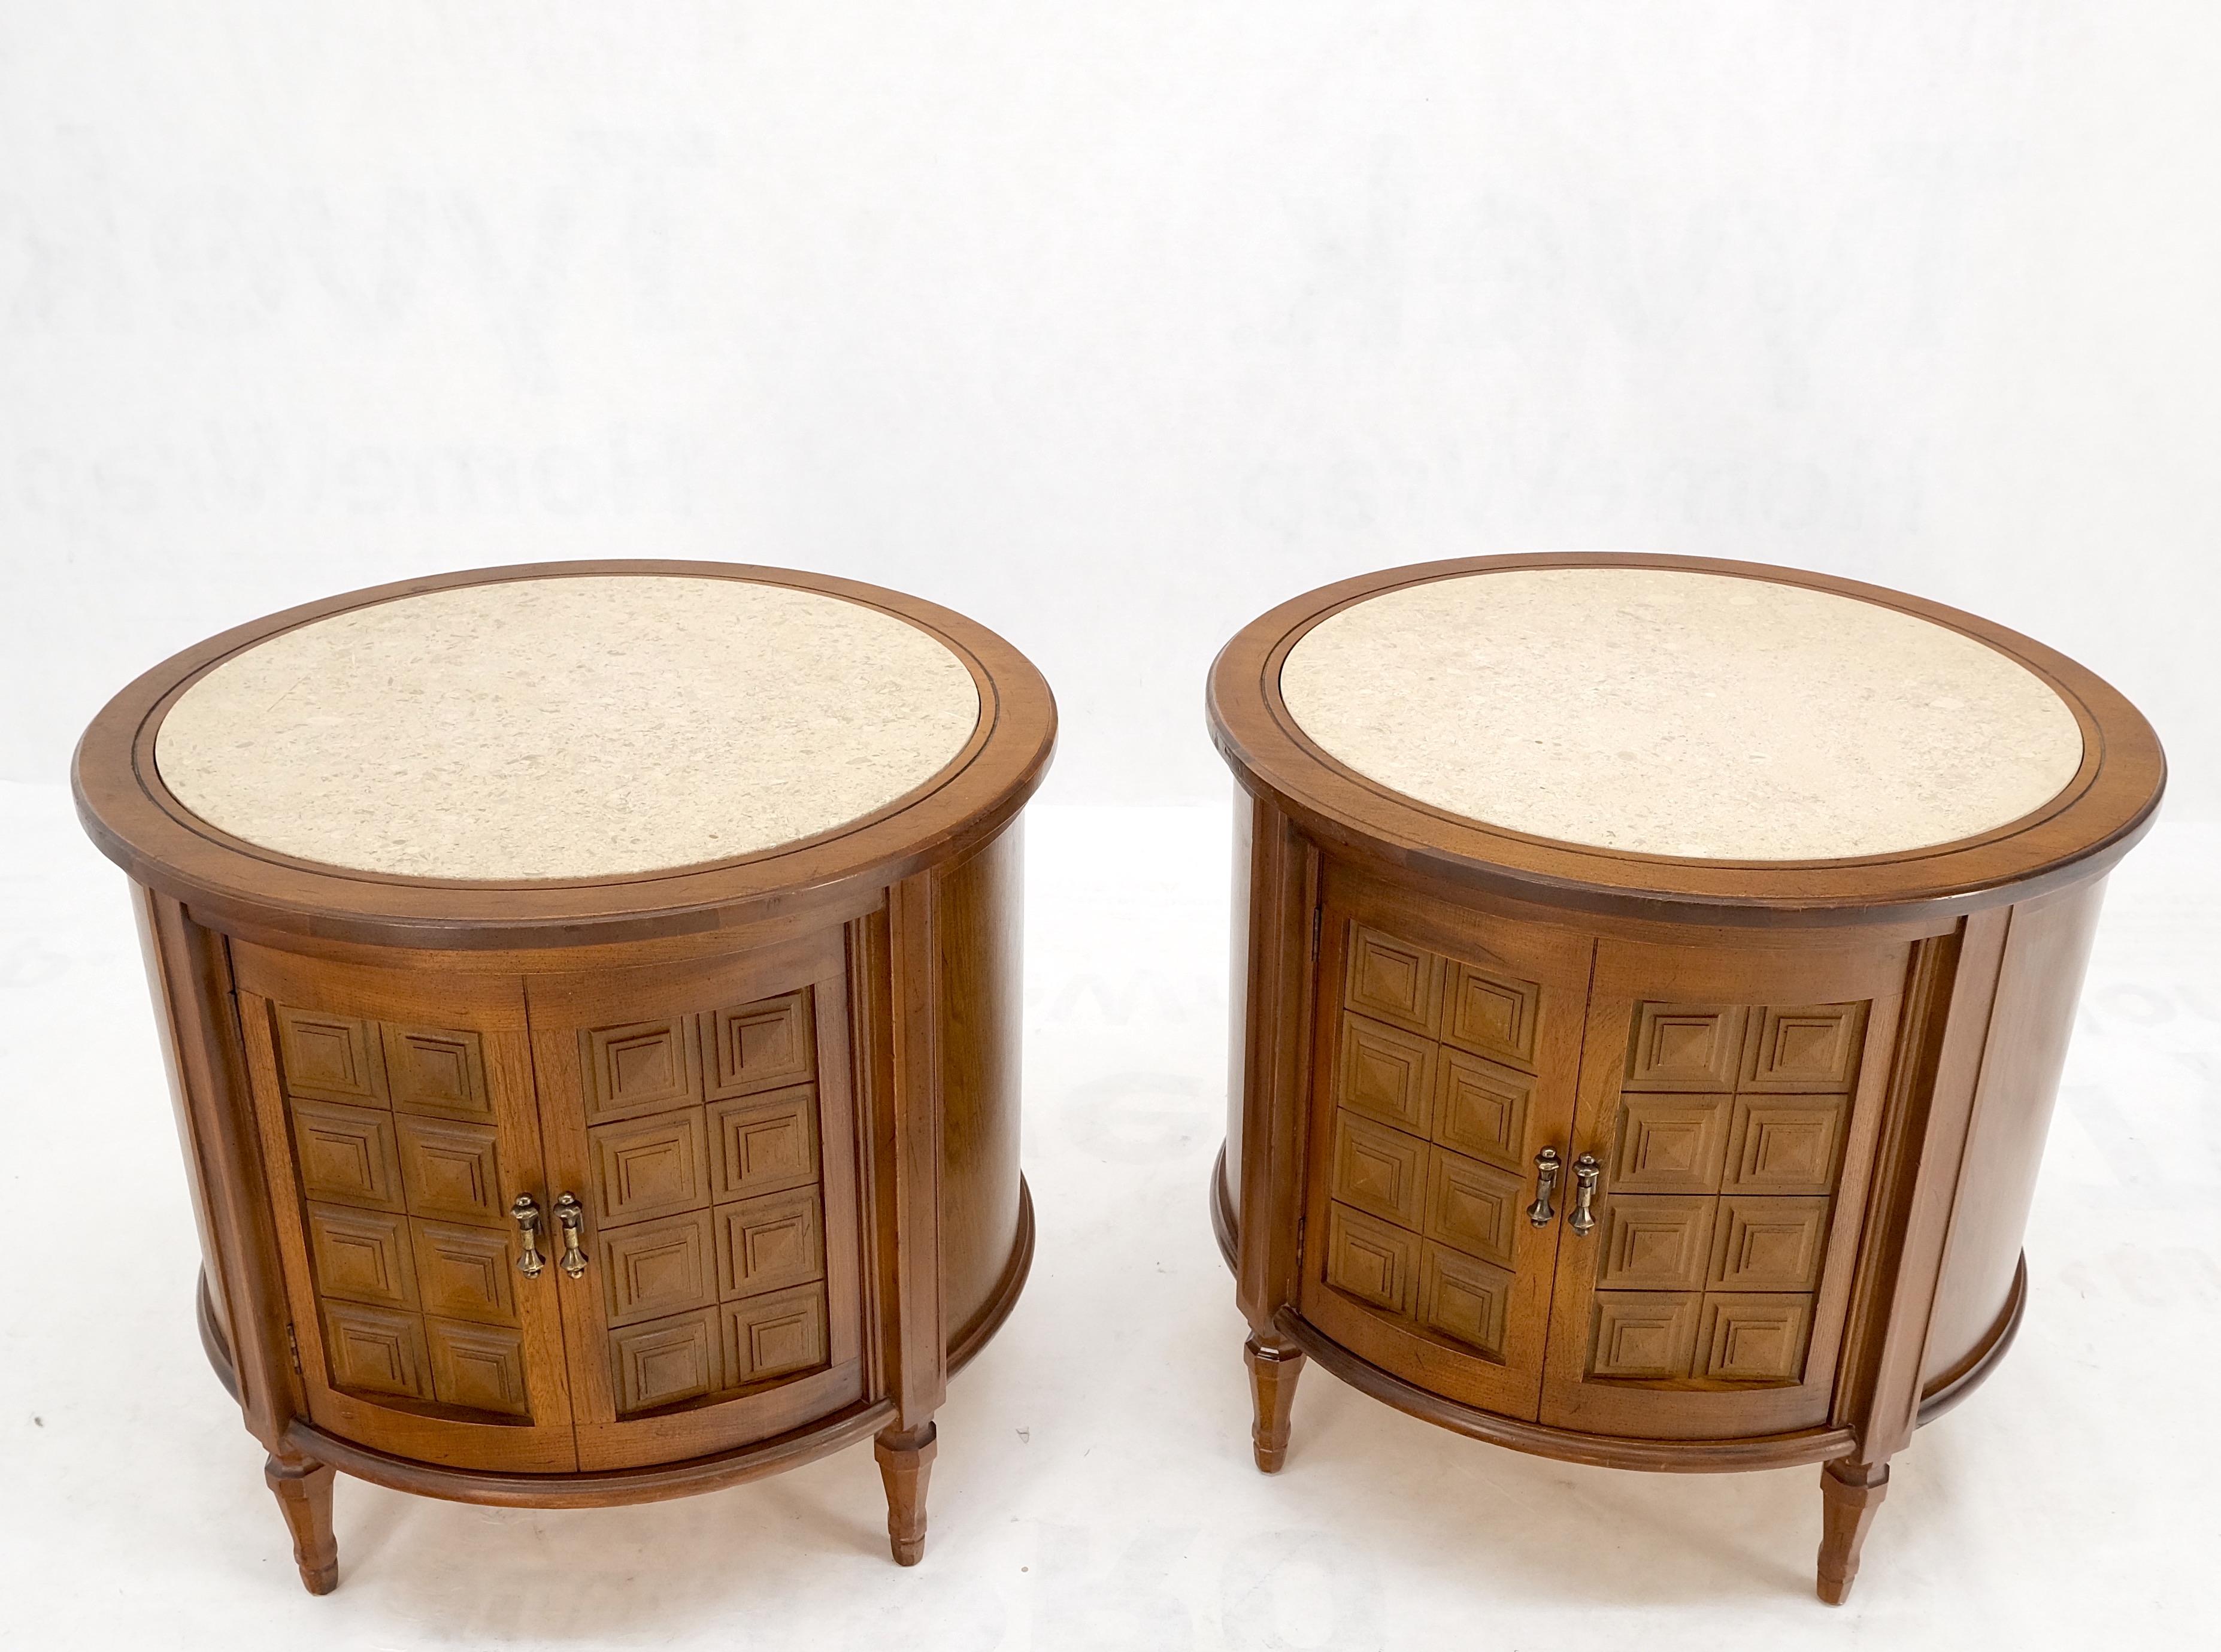 Pair Round Drum Barrel Shape Travertine Top Two Doors End Side Tables Stand Mint In Good Condition For Sale In Rockaway, NJ